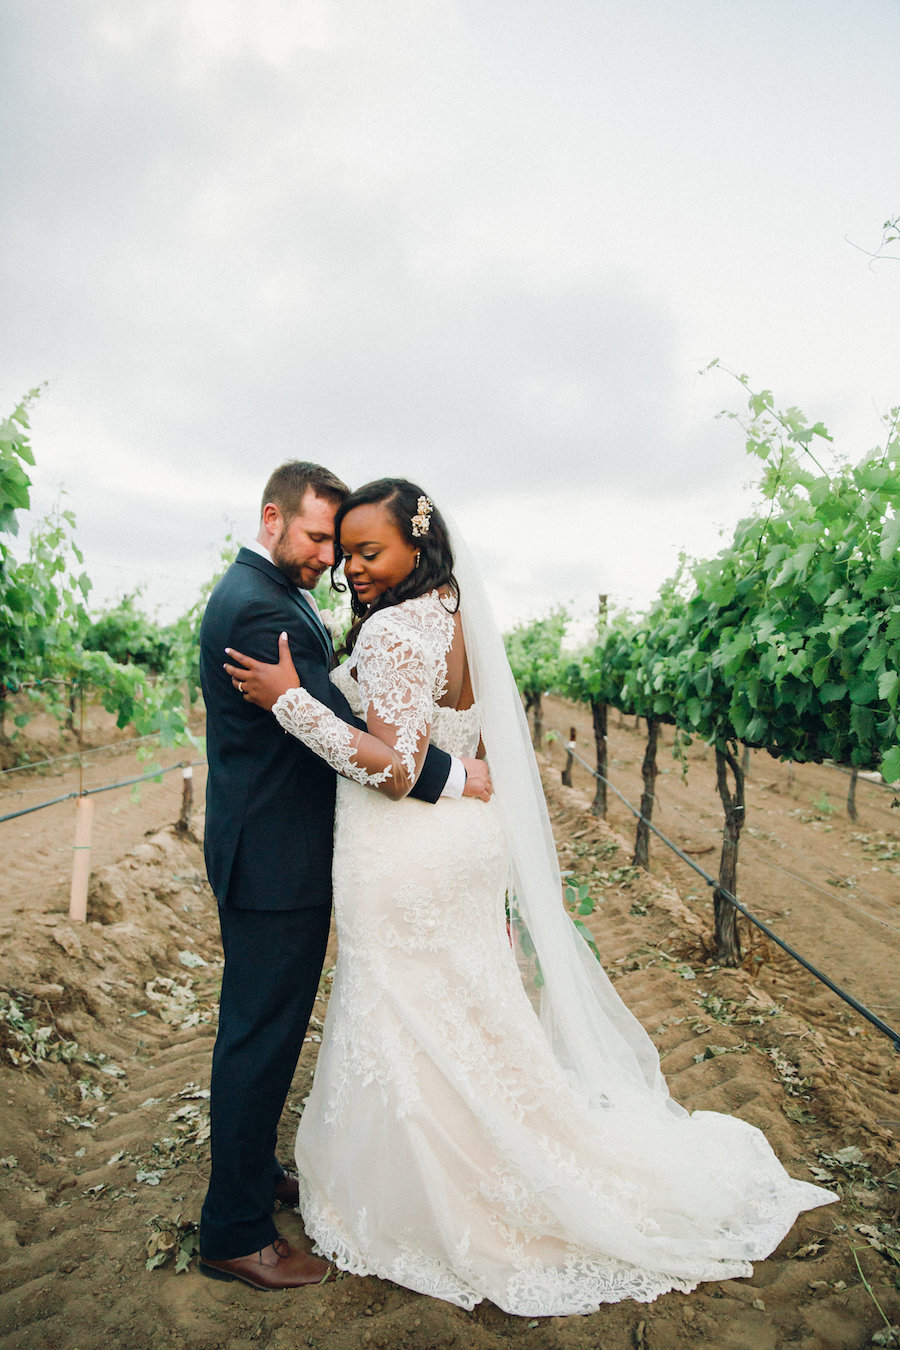 View More: http://michelleflores.pass.us/kristen-and-cole-clarke-wedding-2017